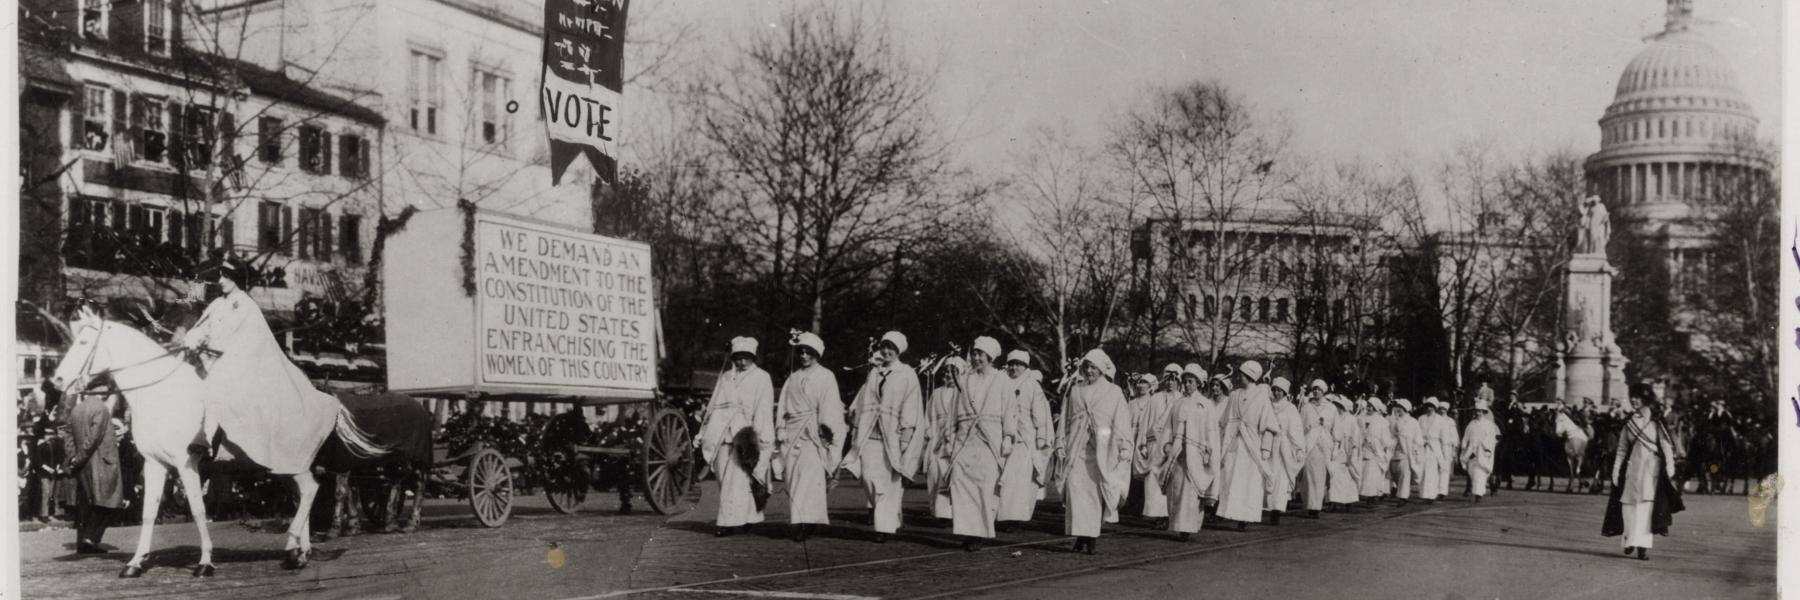 suffragettes marching in washington